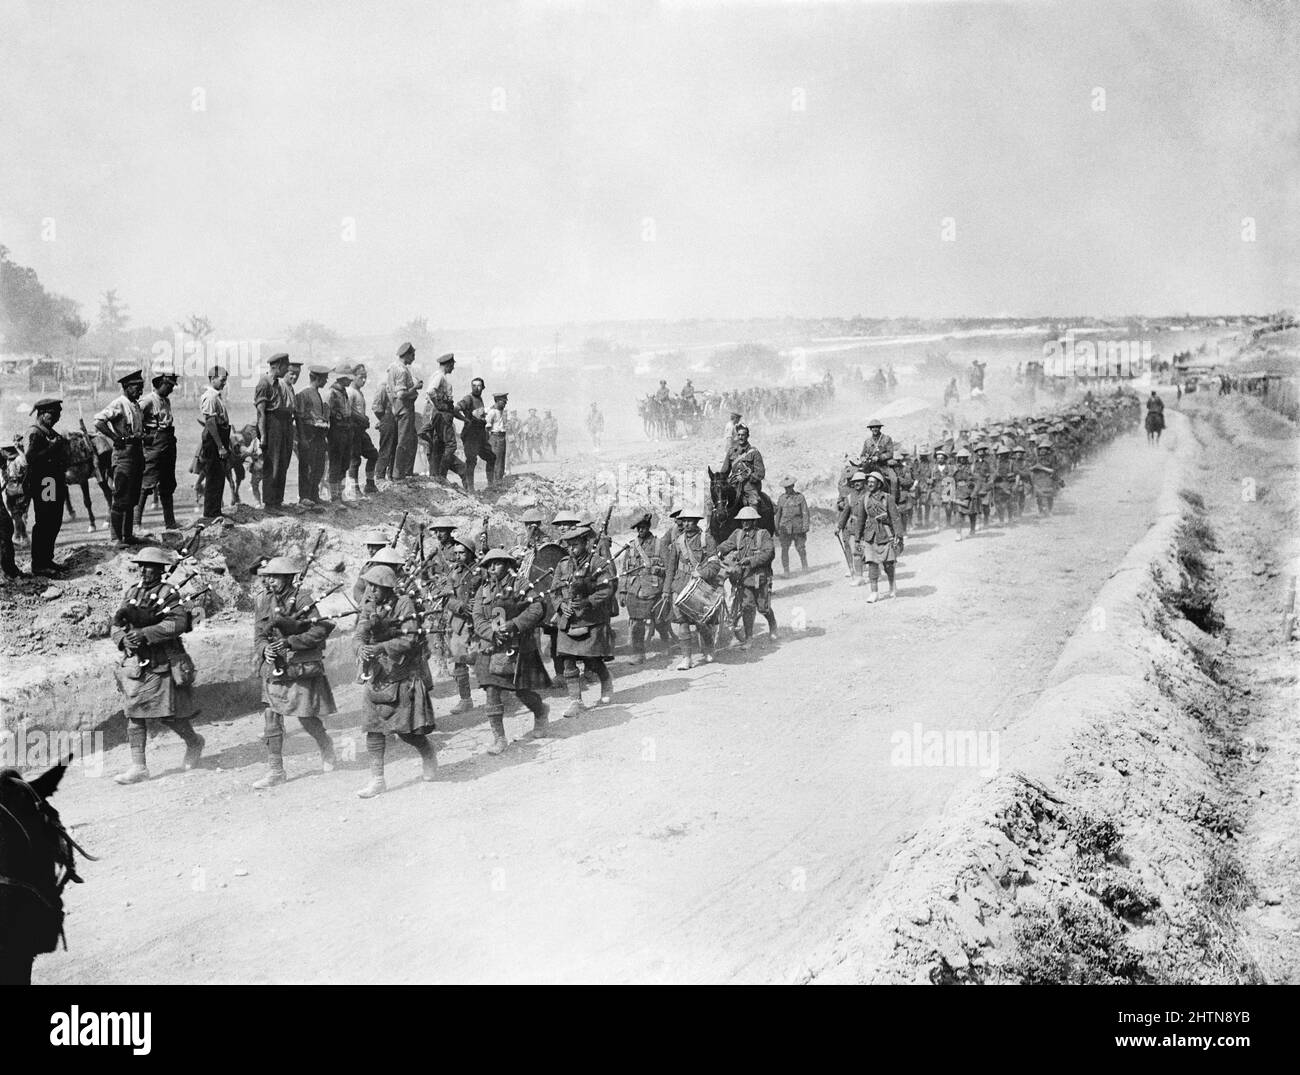 The Black Watch (then knownas the Royal Highlanders, now called the Royal Highland Regiment) marching back along the Fricourt-Albert road headed by their pipers. August 1916 during the Battle of the Somme Stock Photo